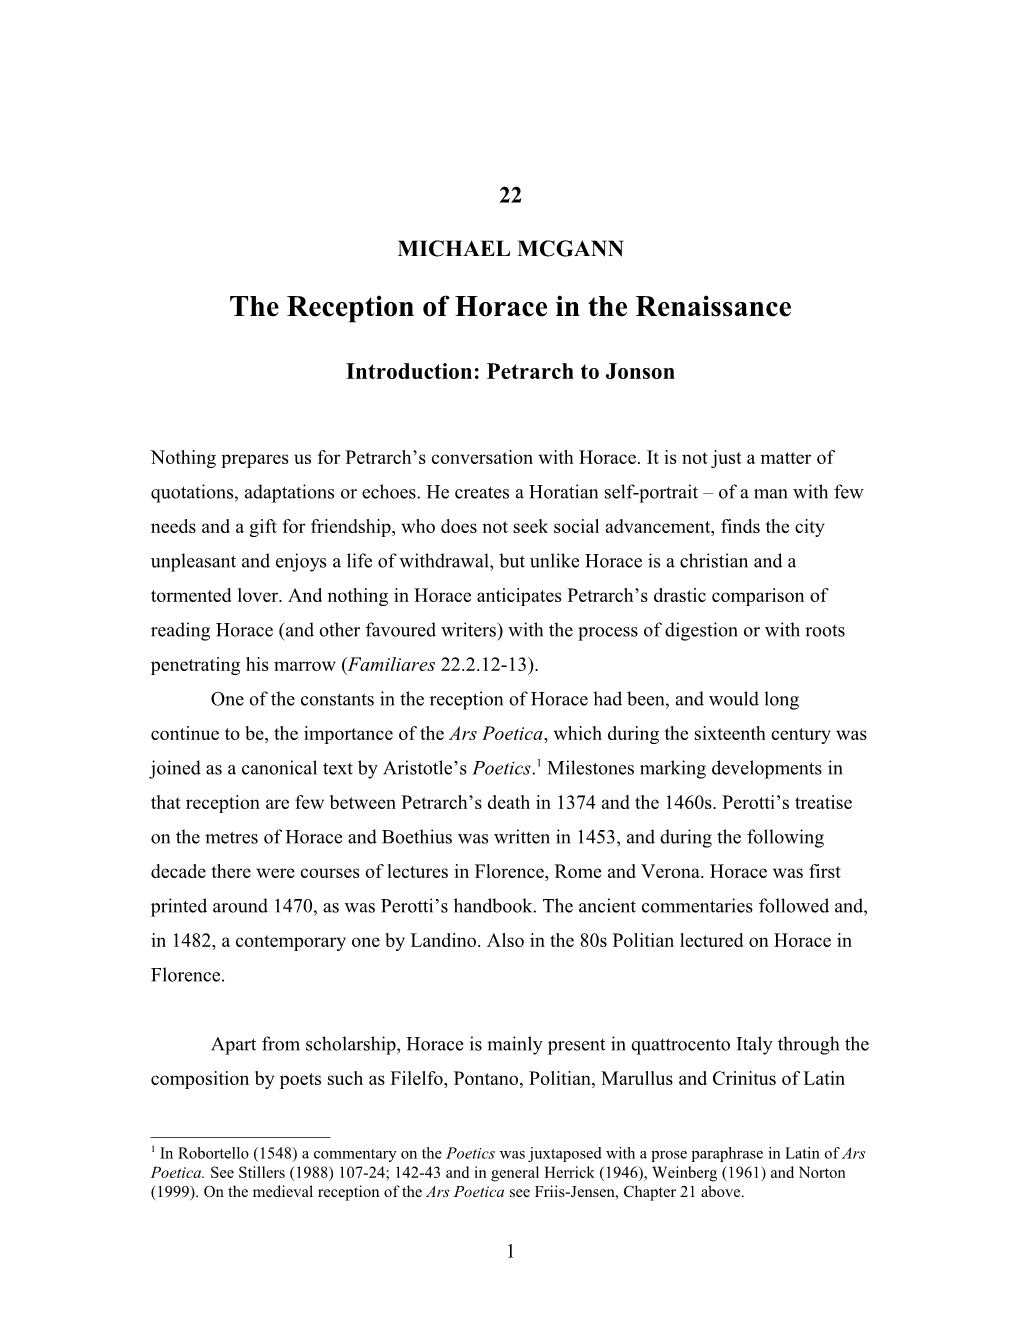 The Reception of Horace in the Renaissance